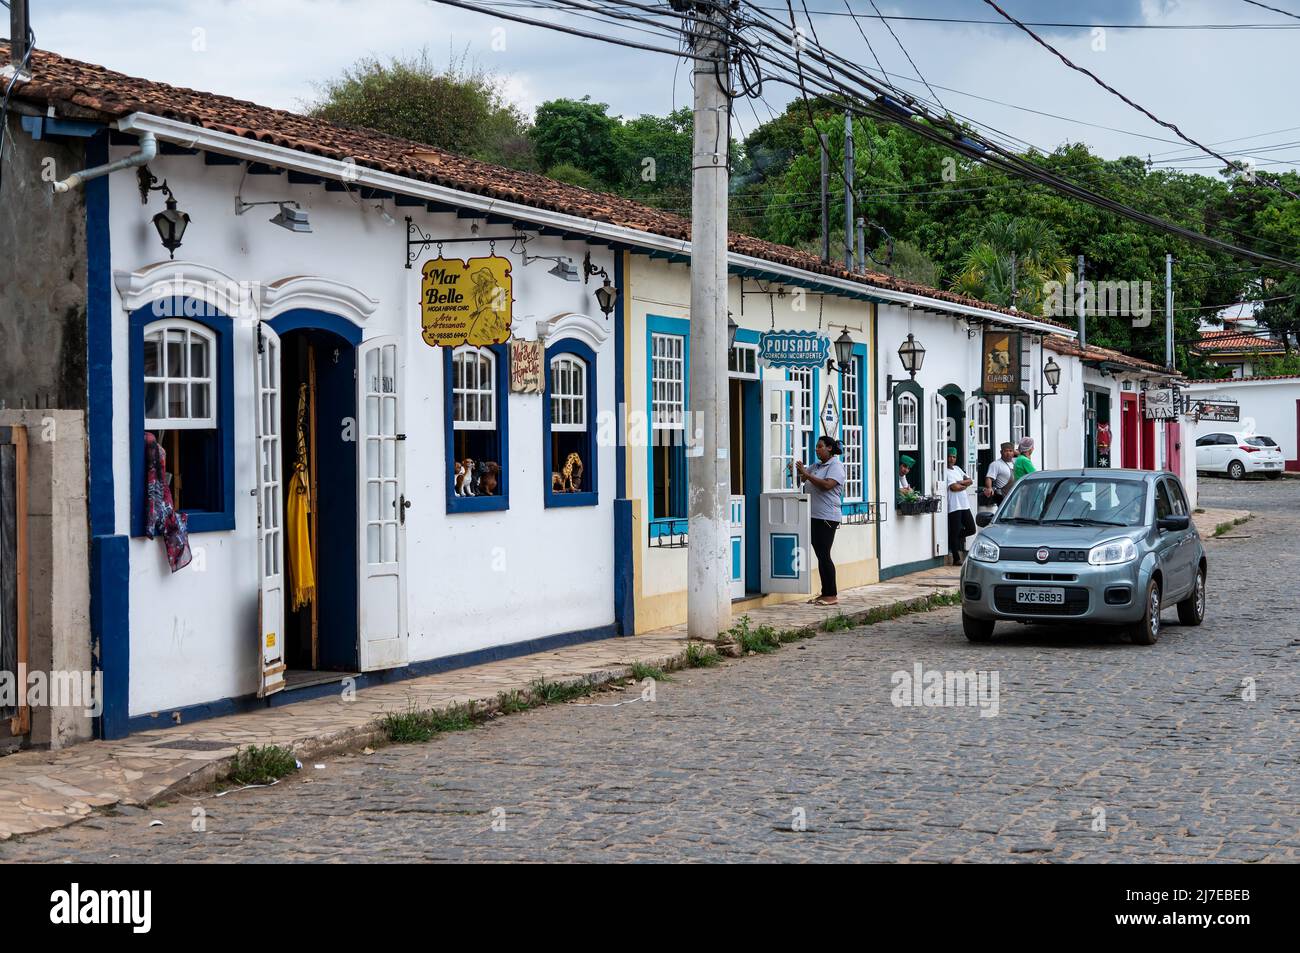 Many colorful colonial buildings with small local business running in it at Inconfidentes street, nearby Tiradentes historical center. Stock Photo